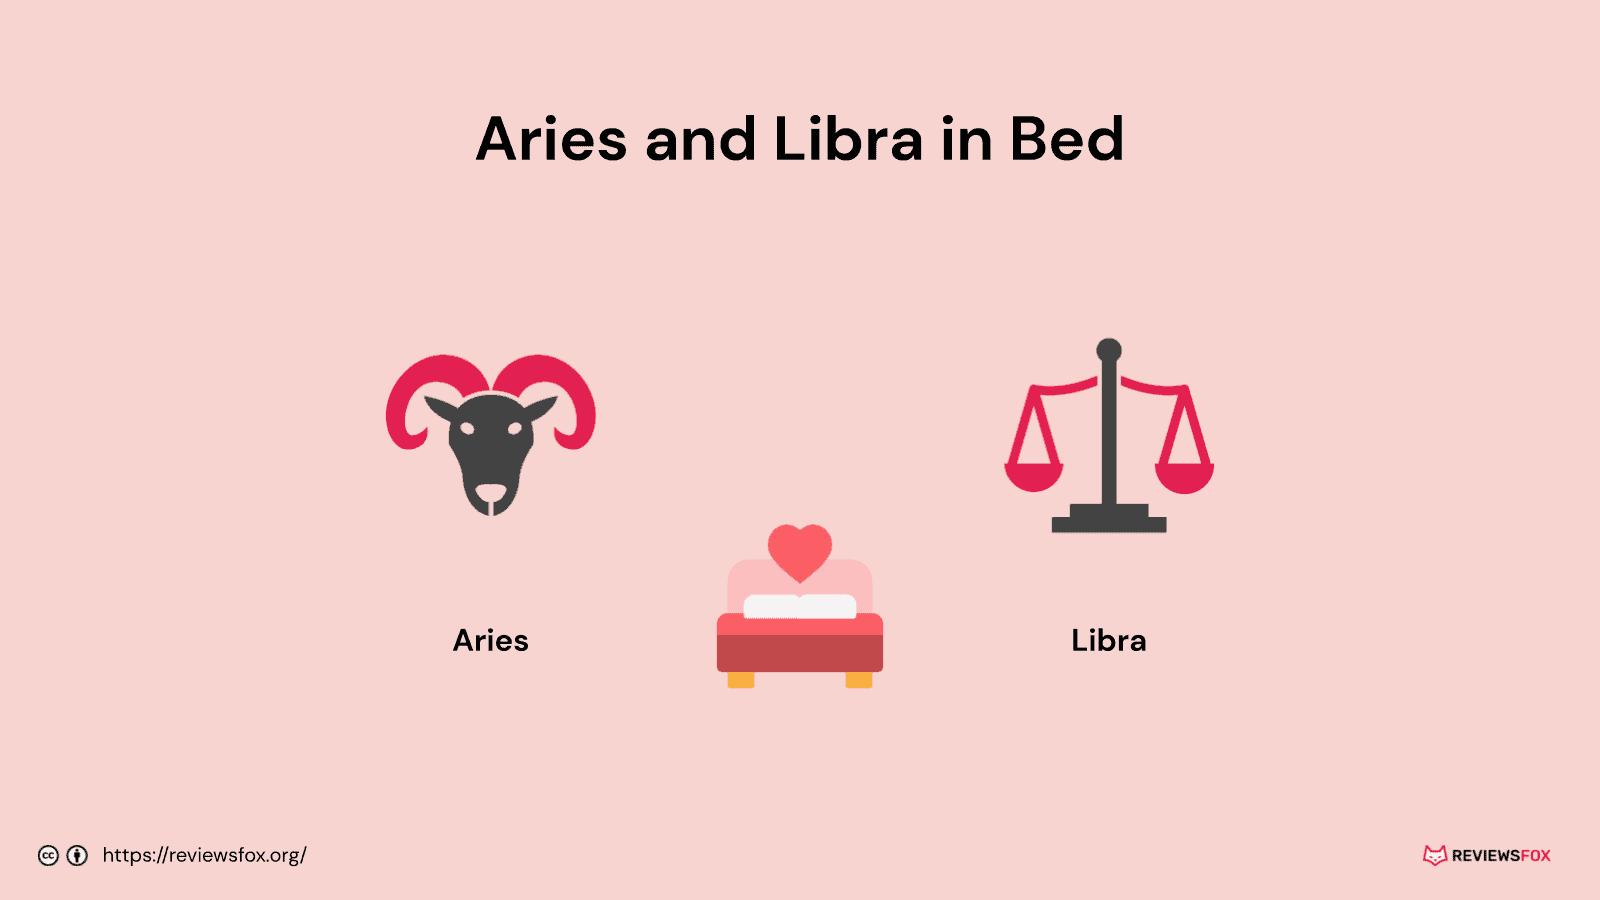 Aries and Libra in bed